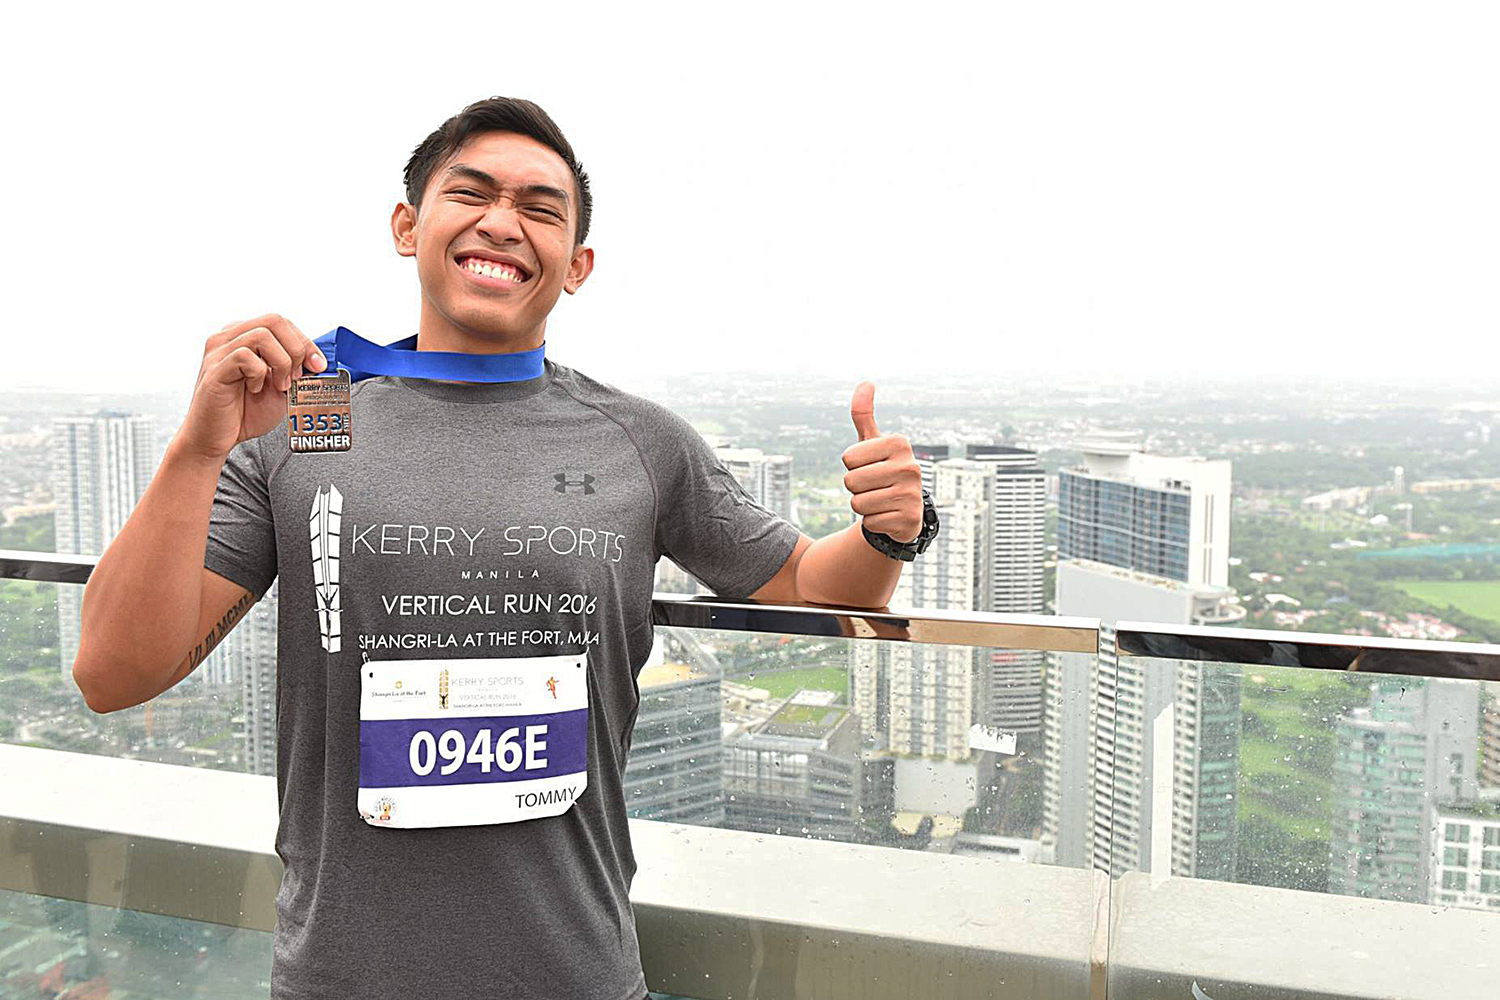 A happy finisher with a view at the Kerry Sports Manila Vertical Run 